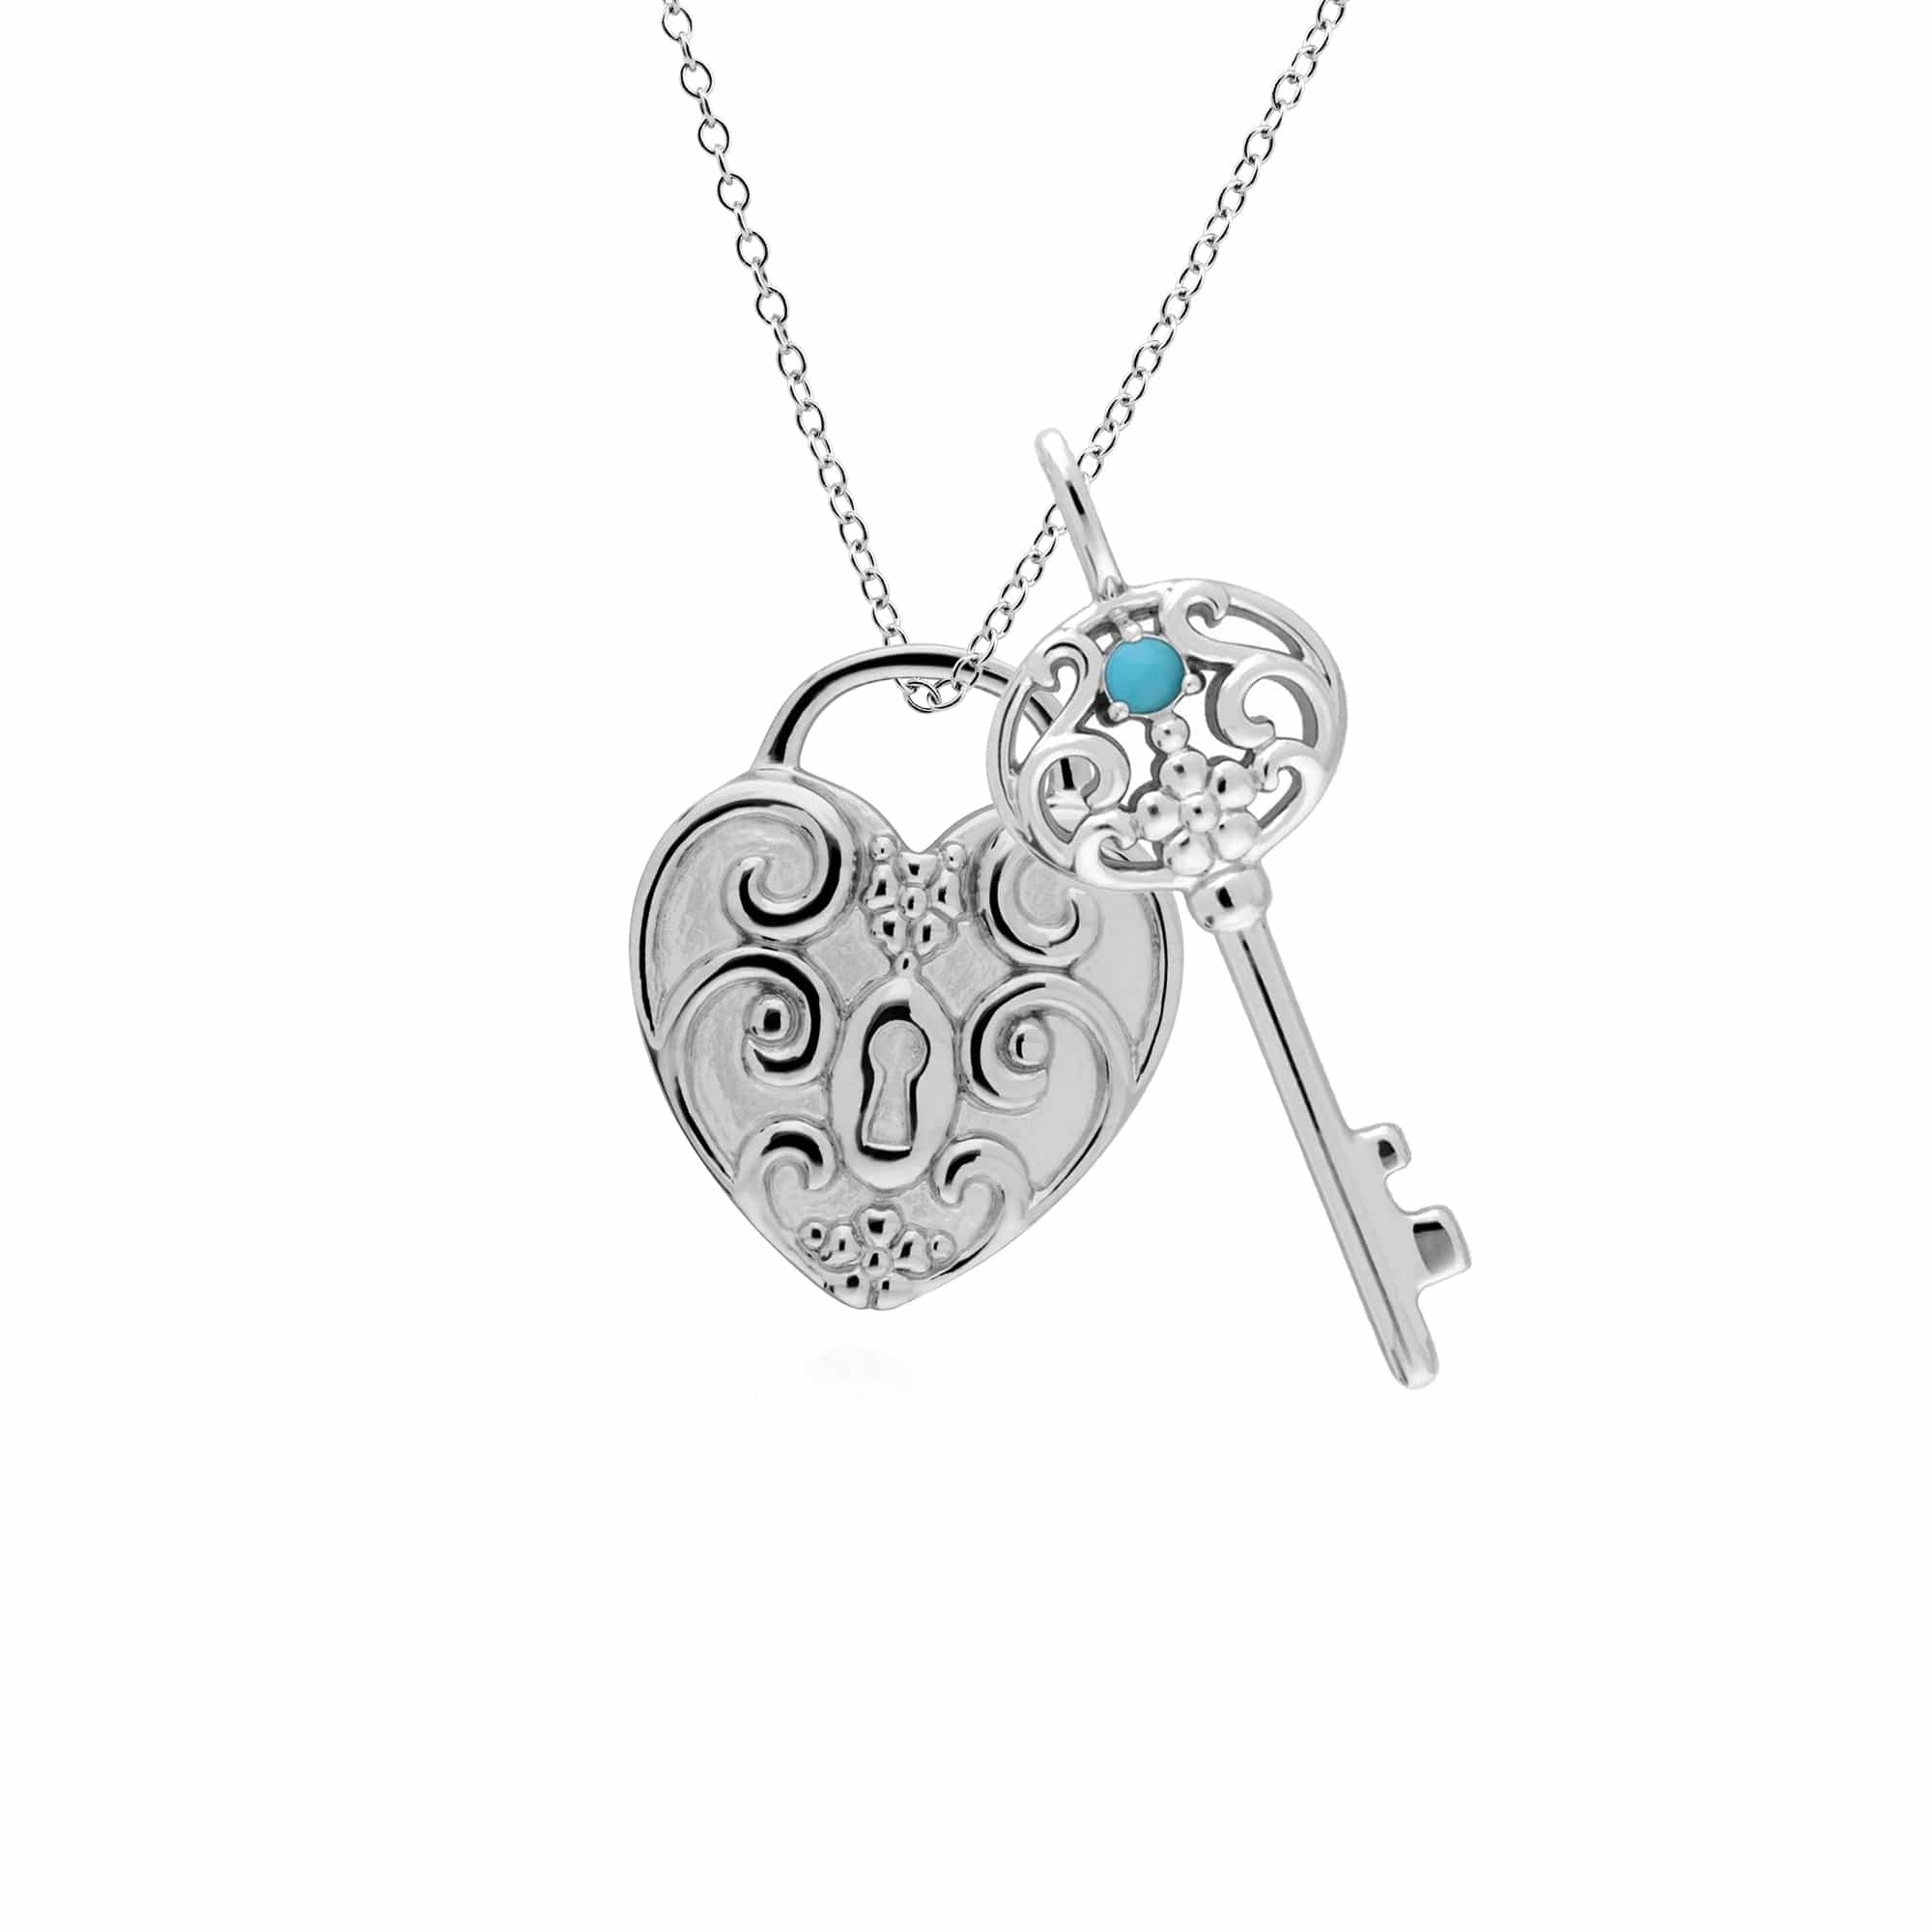 270P026805925-270P026601925 Classic Swirl Heart Lock Pendant & Turquoise Big Key Charm in 925 Sterling Silver 1